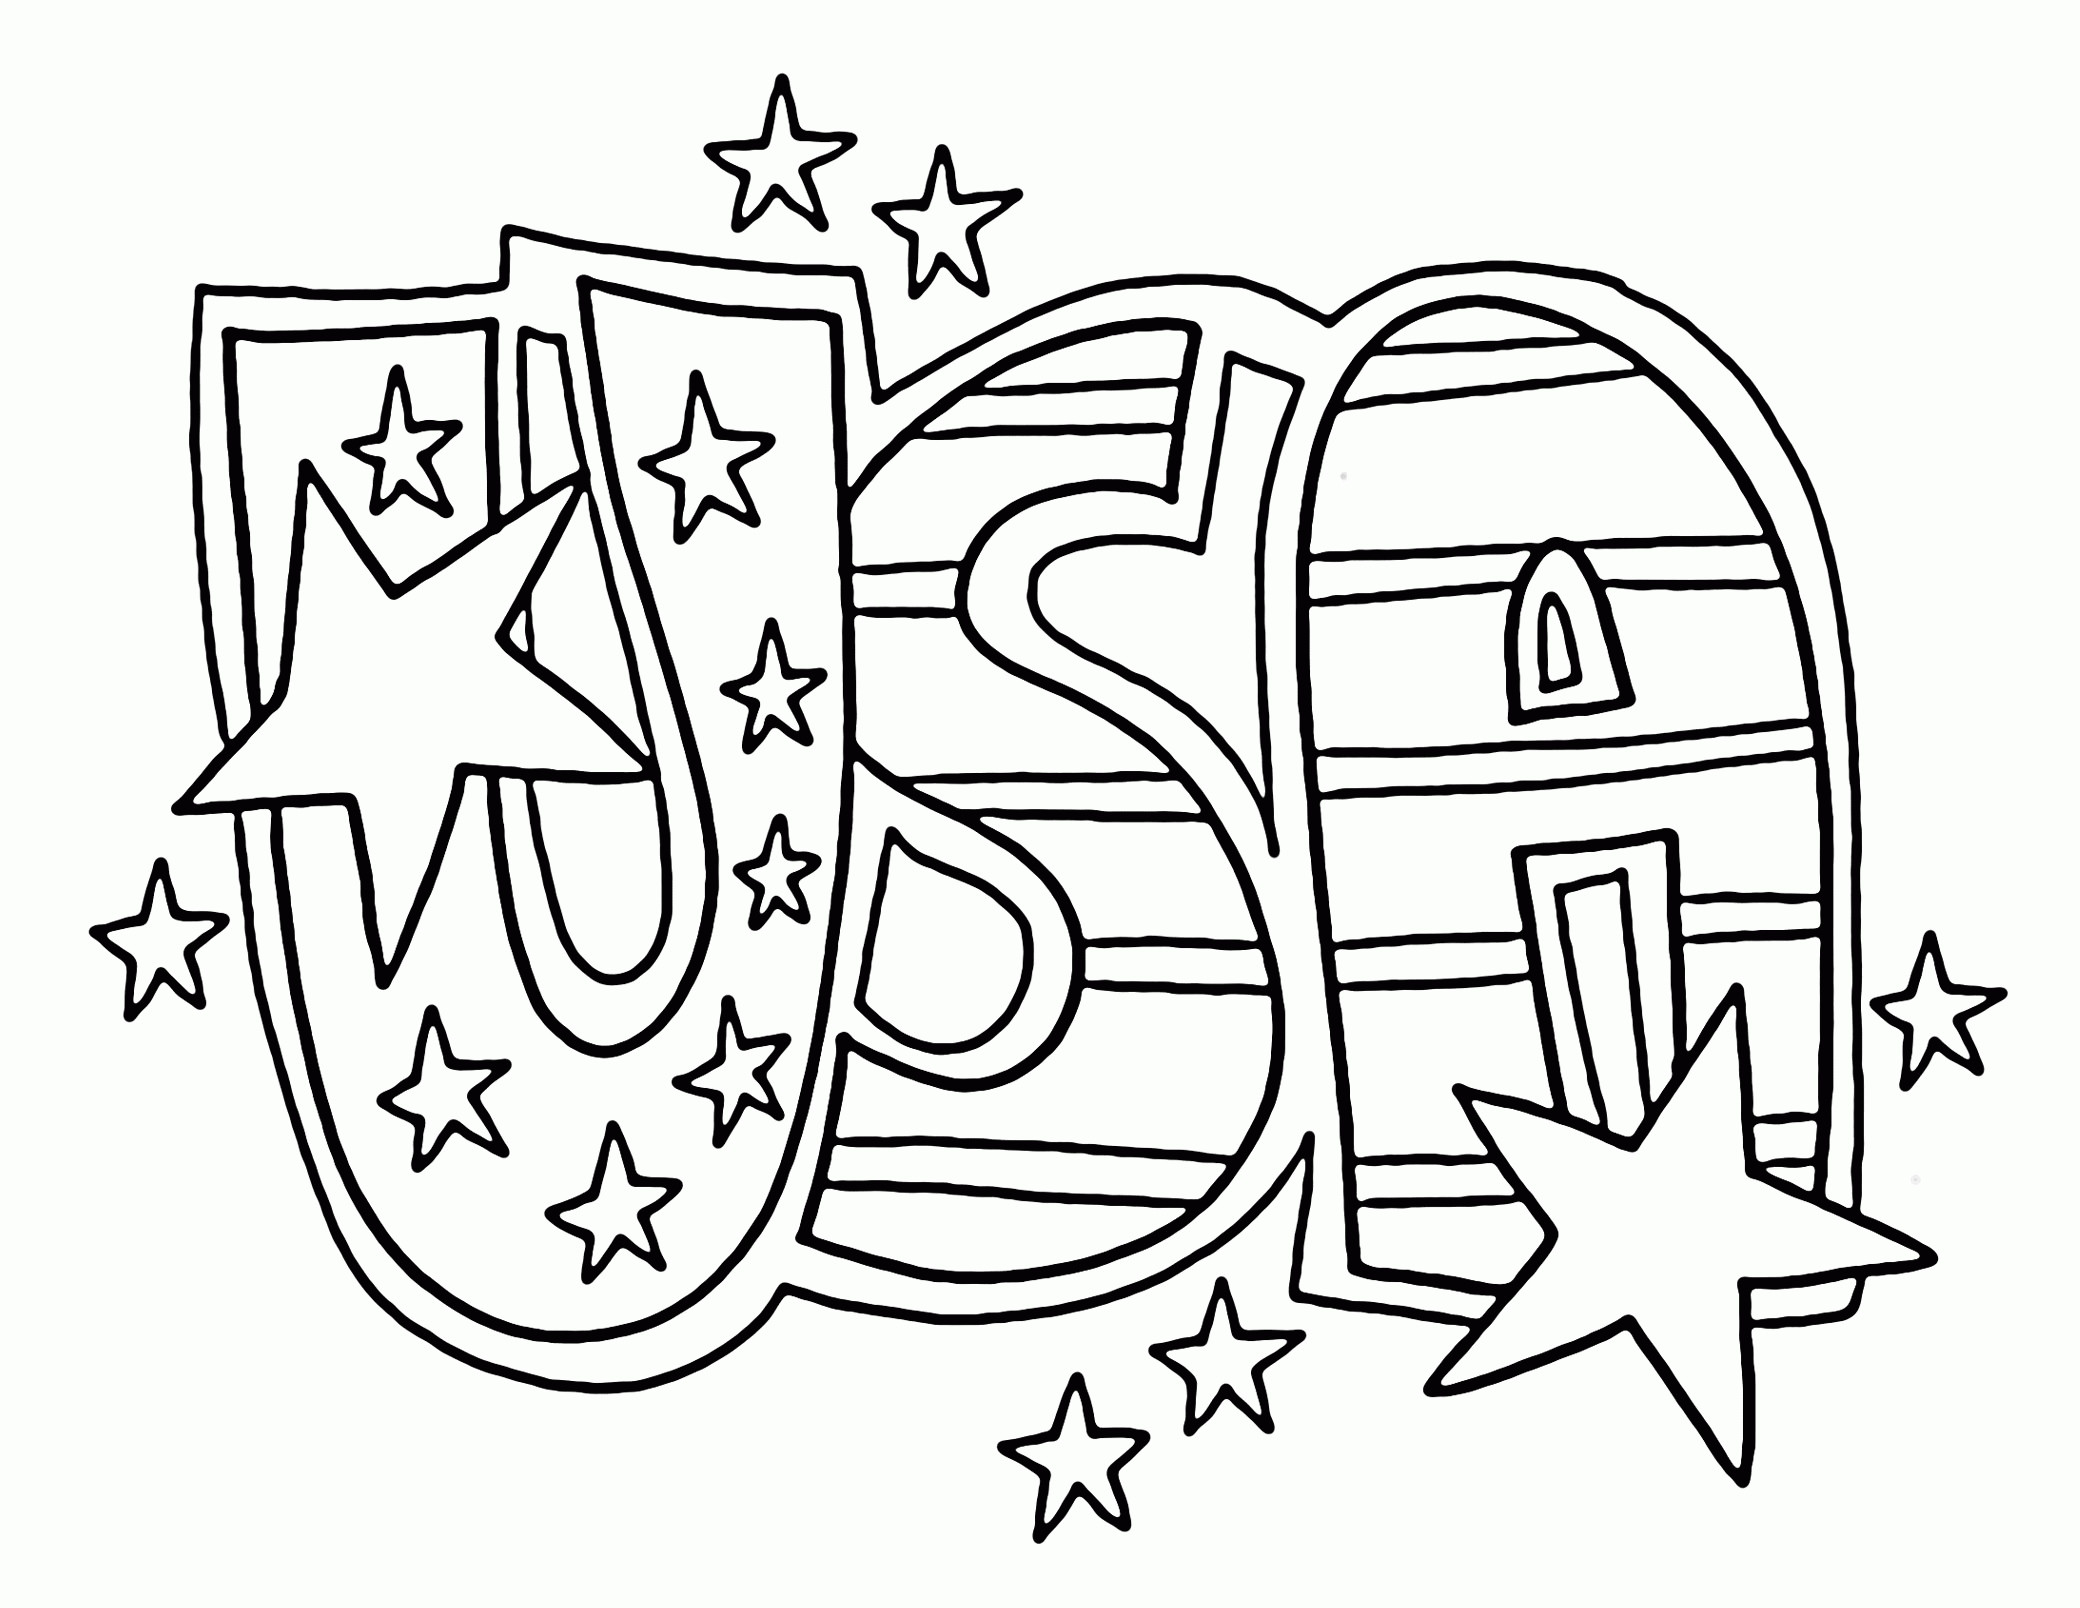 I Love Usa Coloring Pages
 Now I Love Usa Coloring Pages 4th July For Toddlers